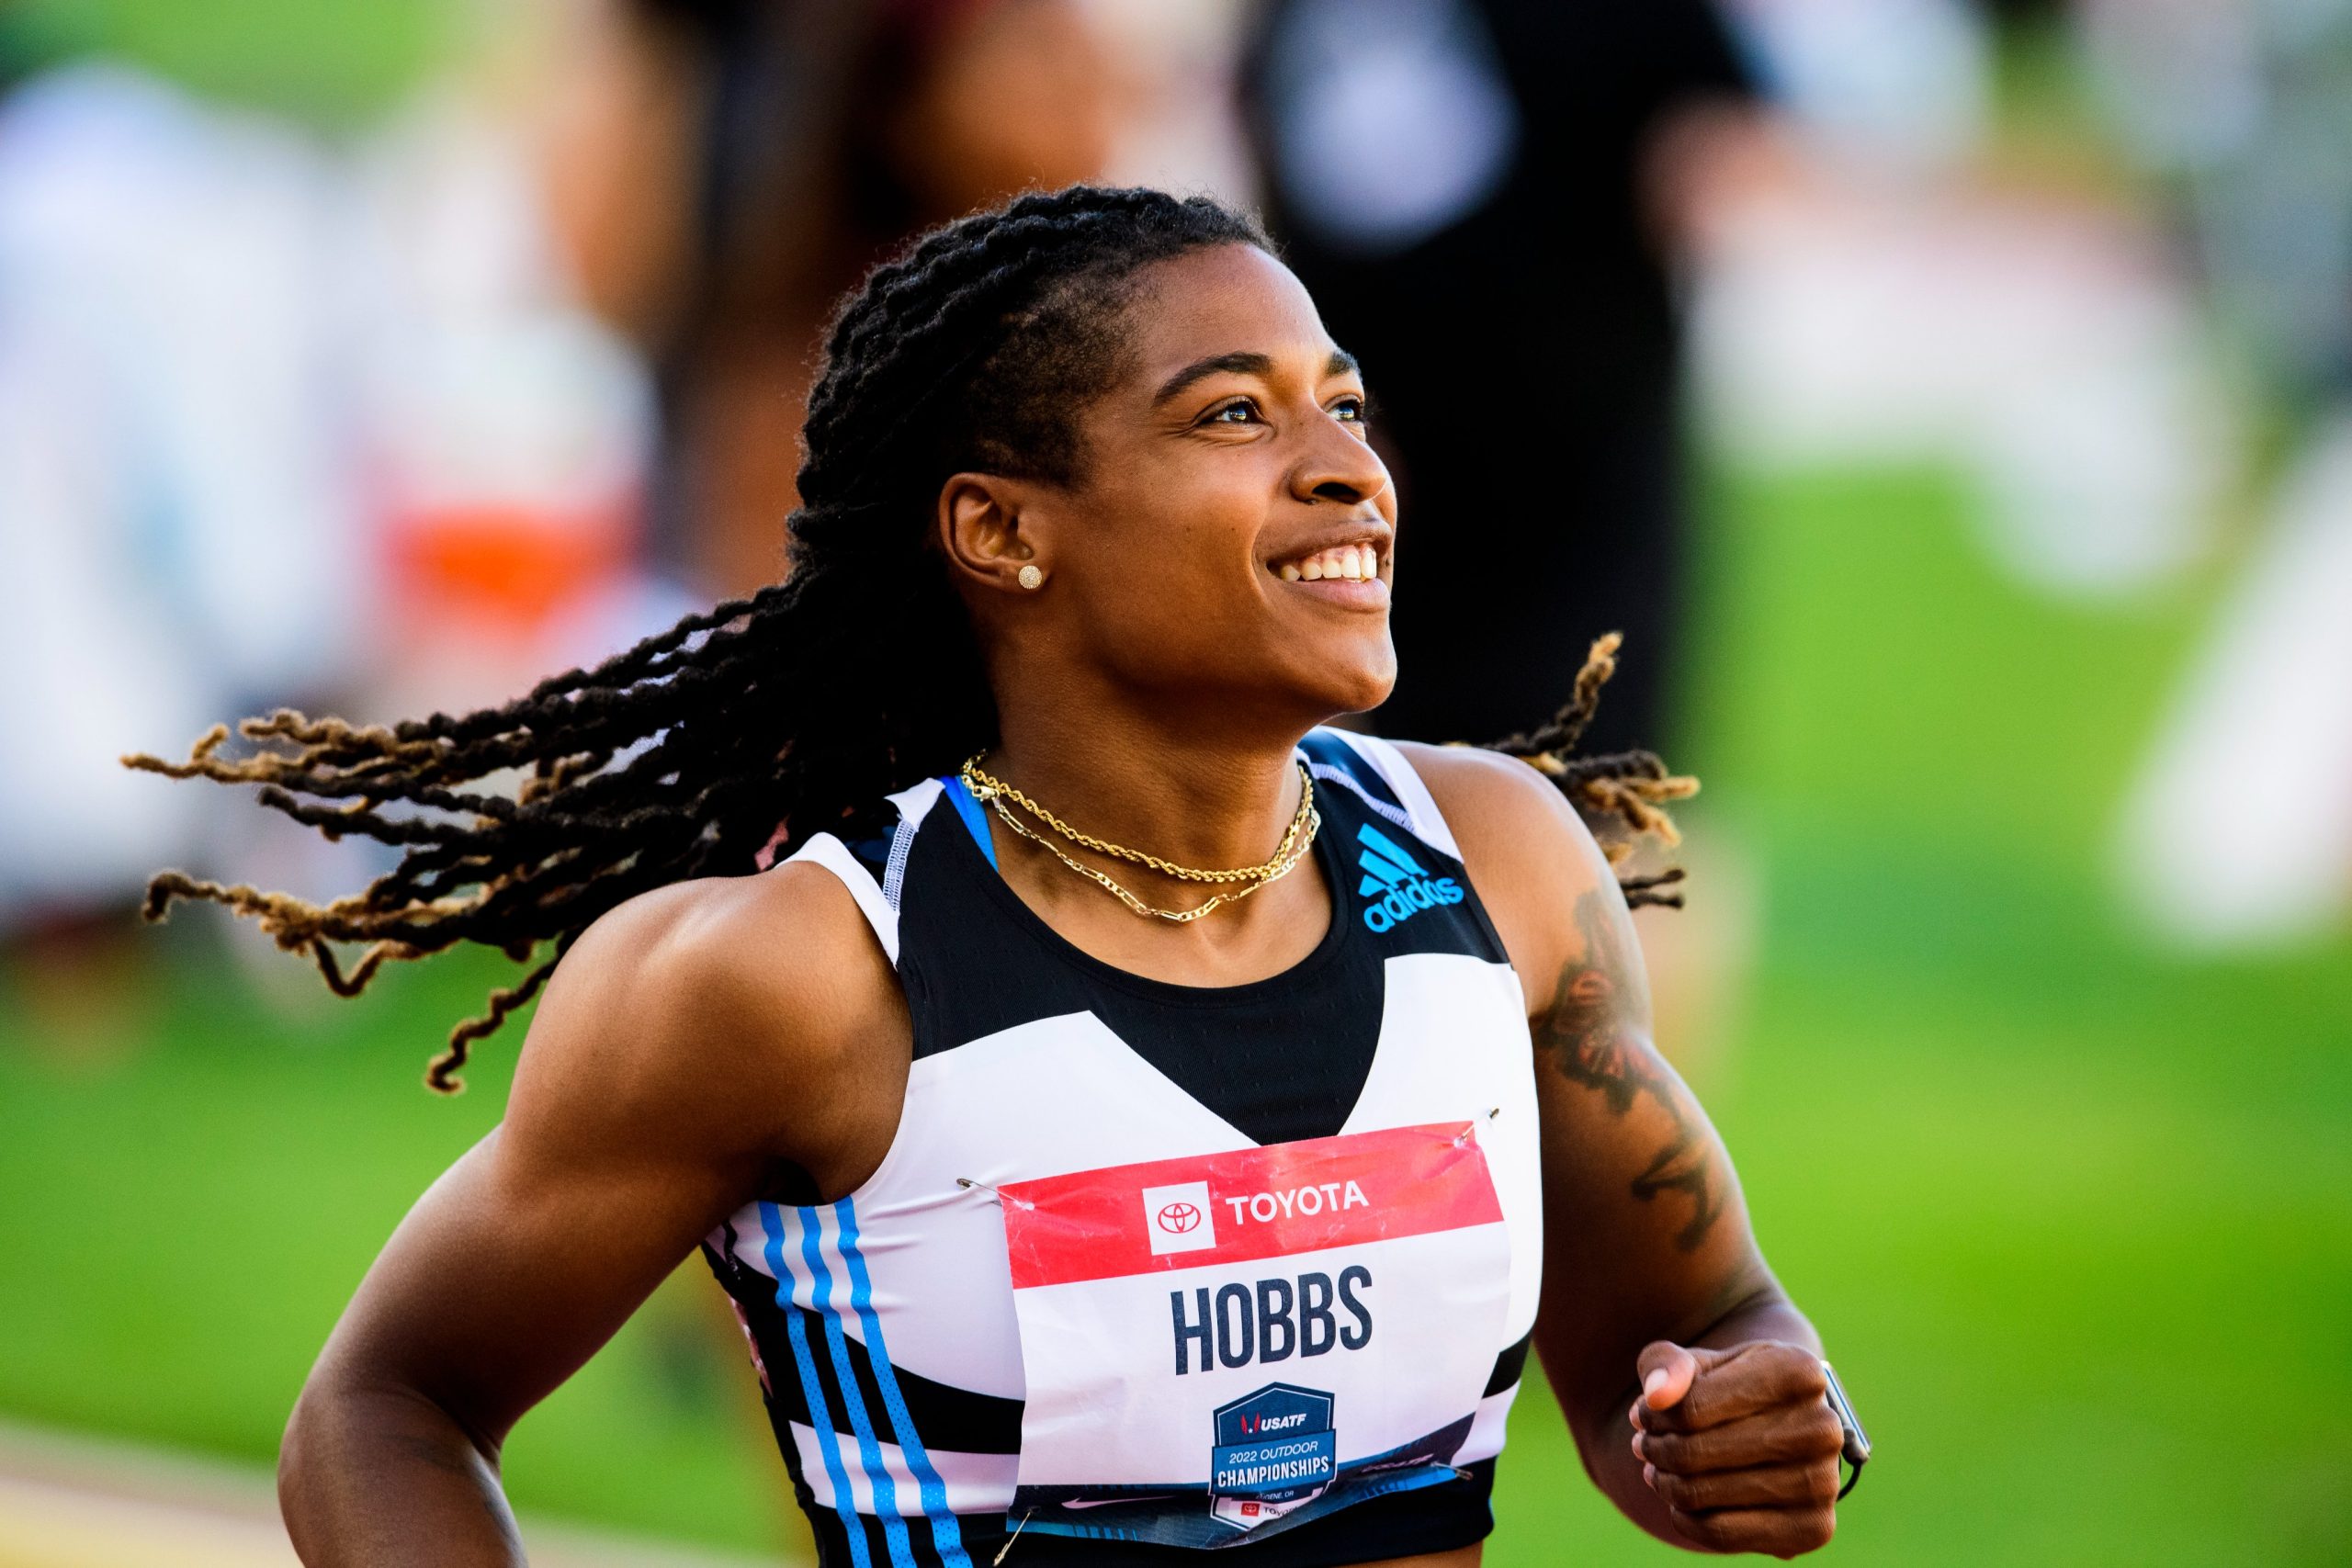 Aleia Hobbs: Prevailing through Injuries and Becoming One of the World’s Best